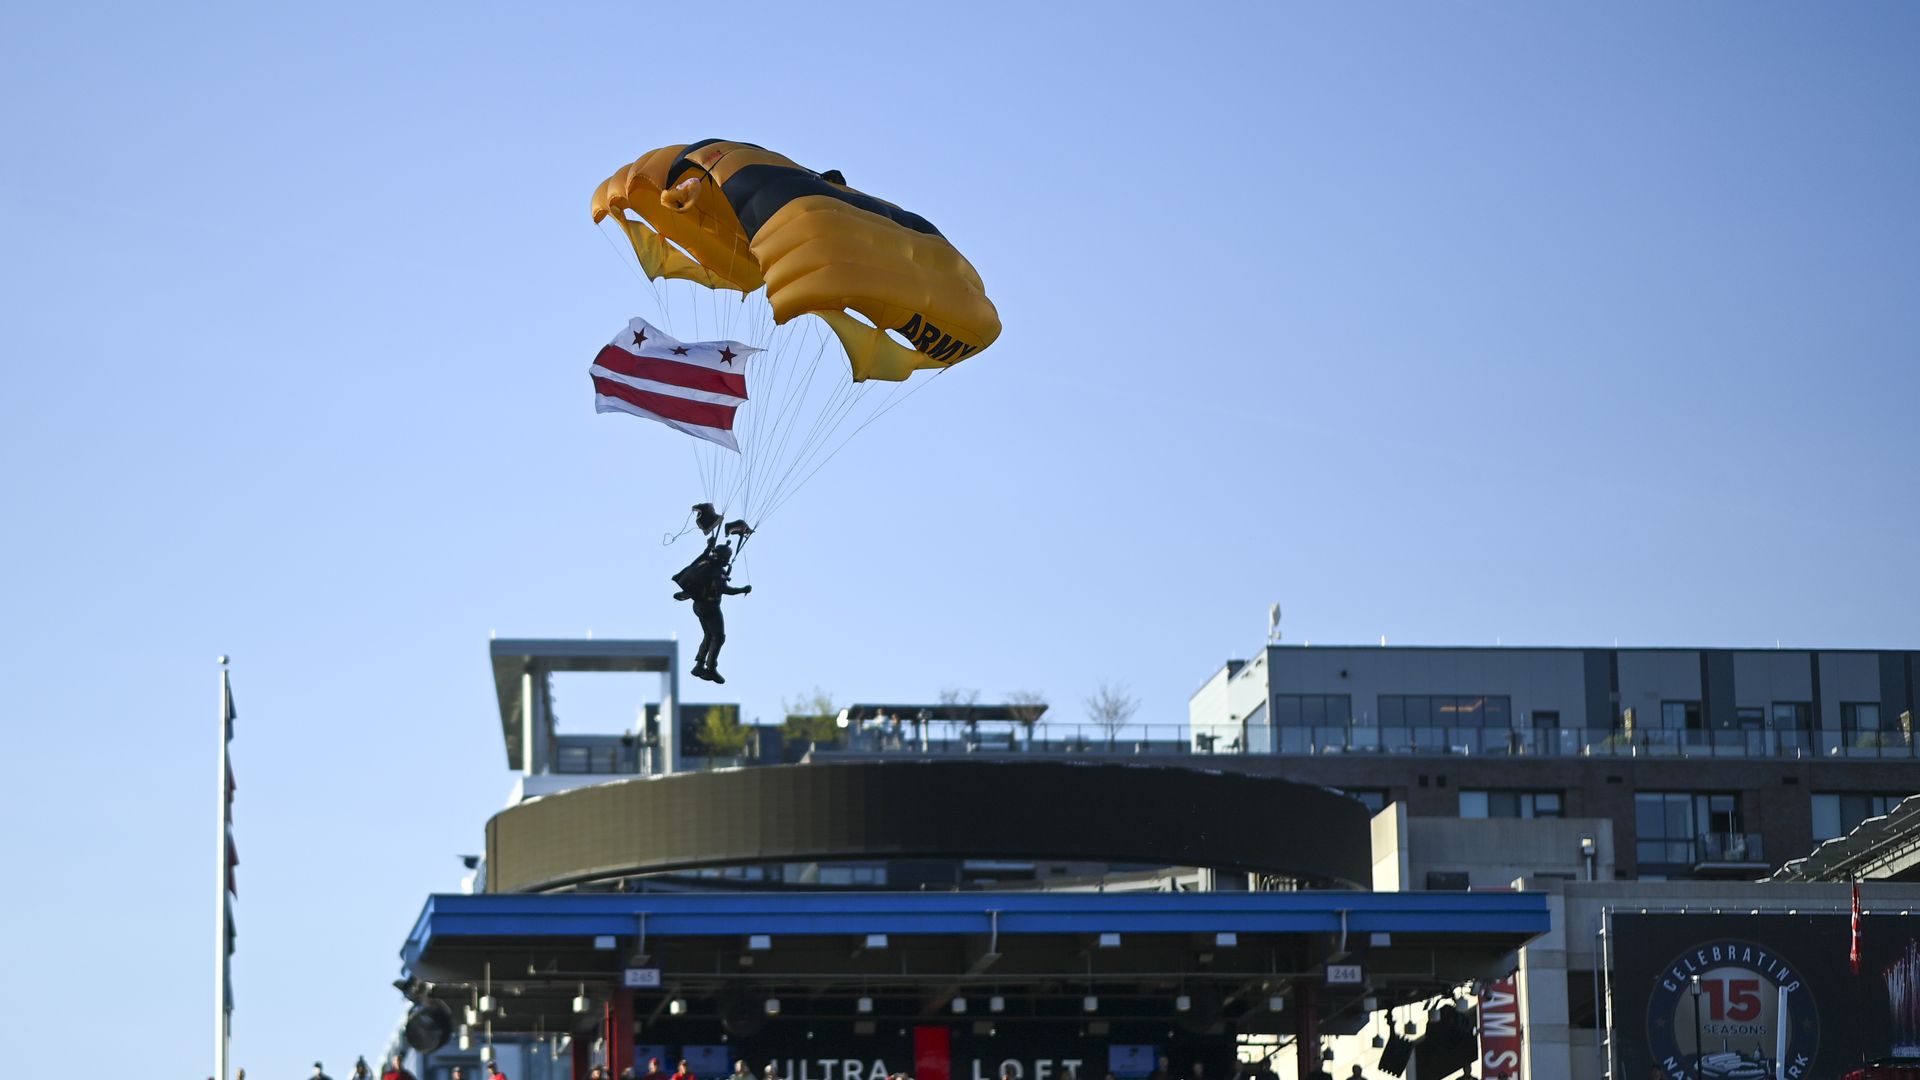 Photo of a person parachuting into a large stadium filled with people